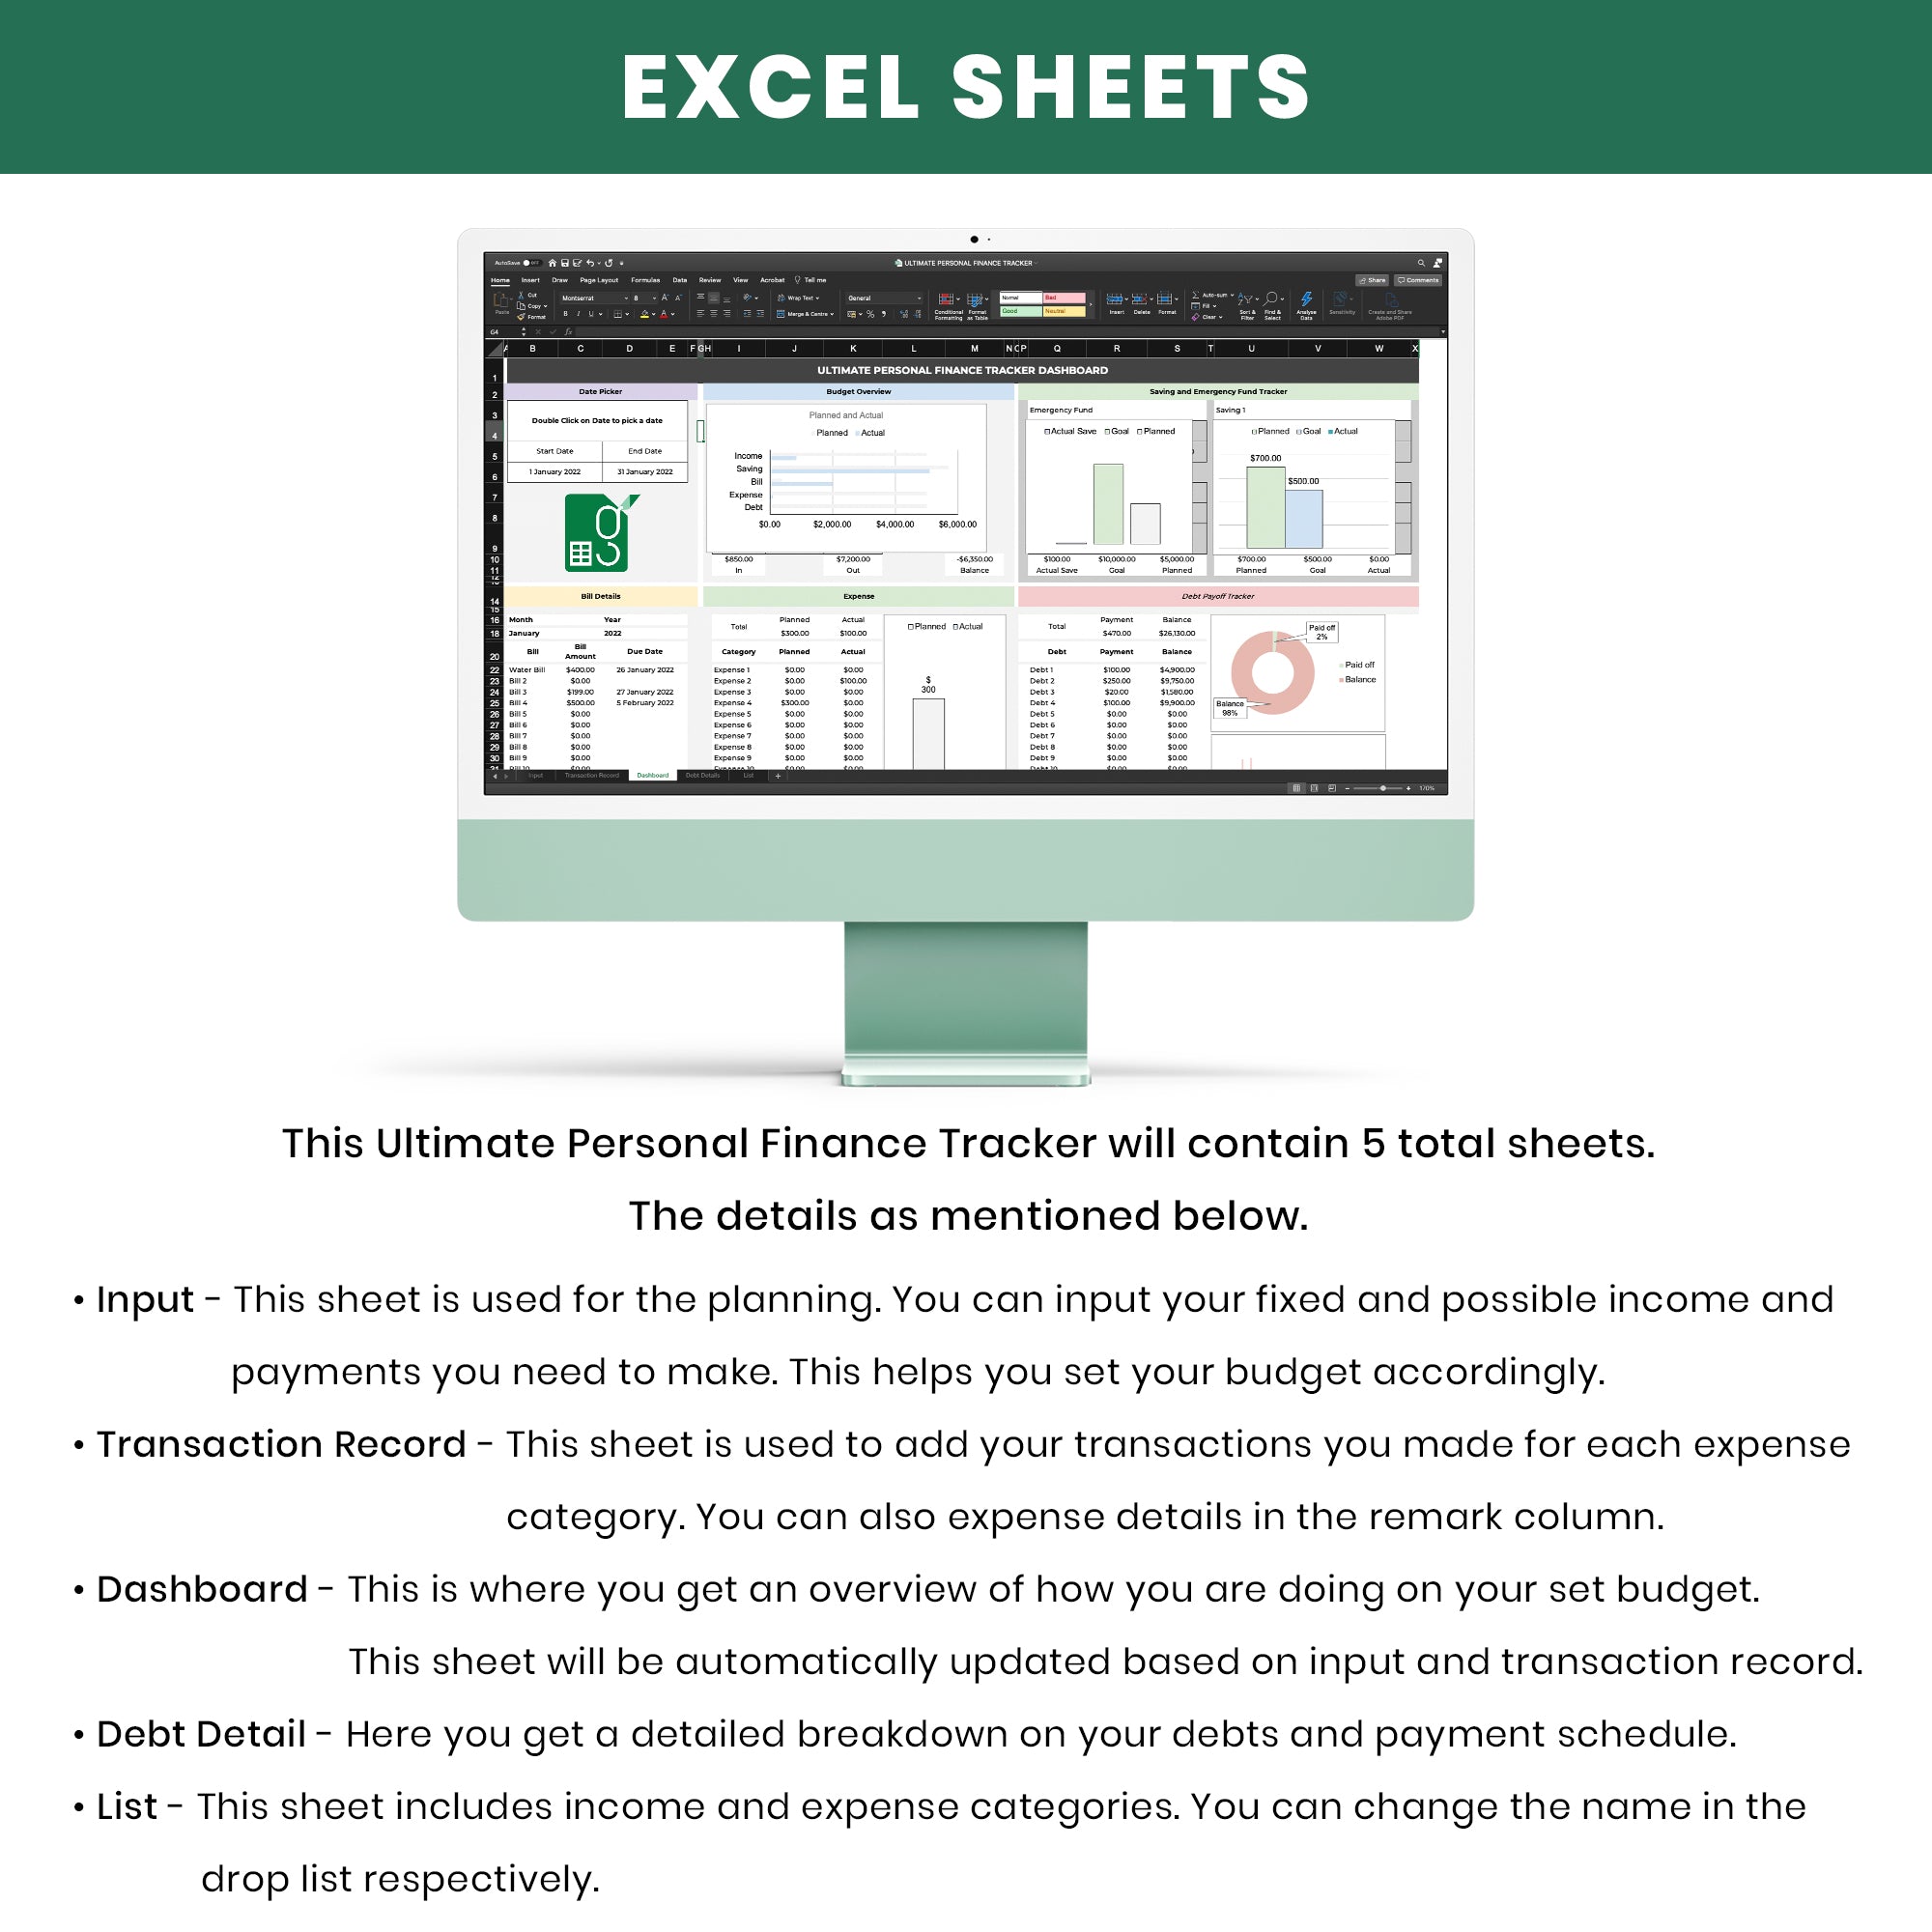 EXCEL VERSION - Ultimate Personal Finance Tracker - Manage Your Finance With This Easy to Use Excel Sheet